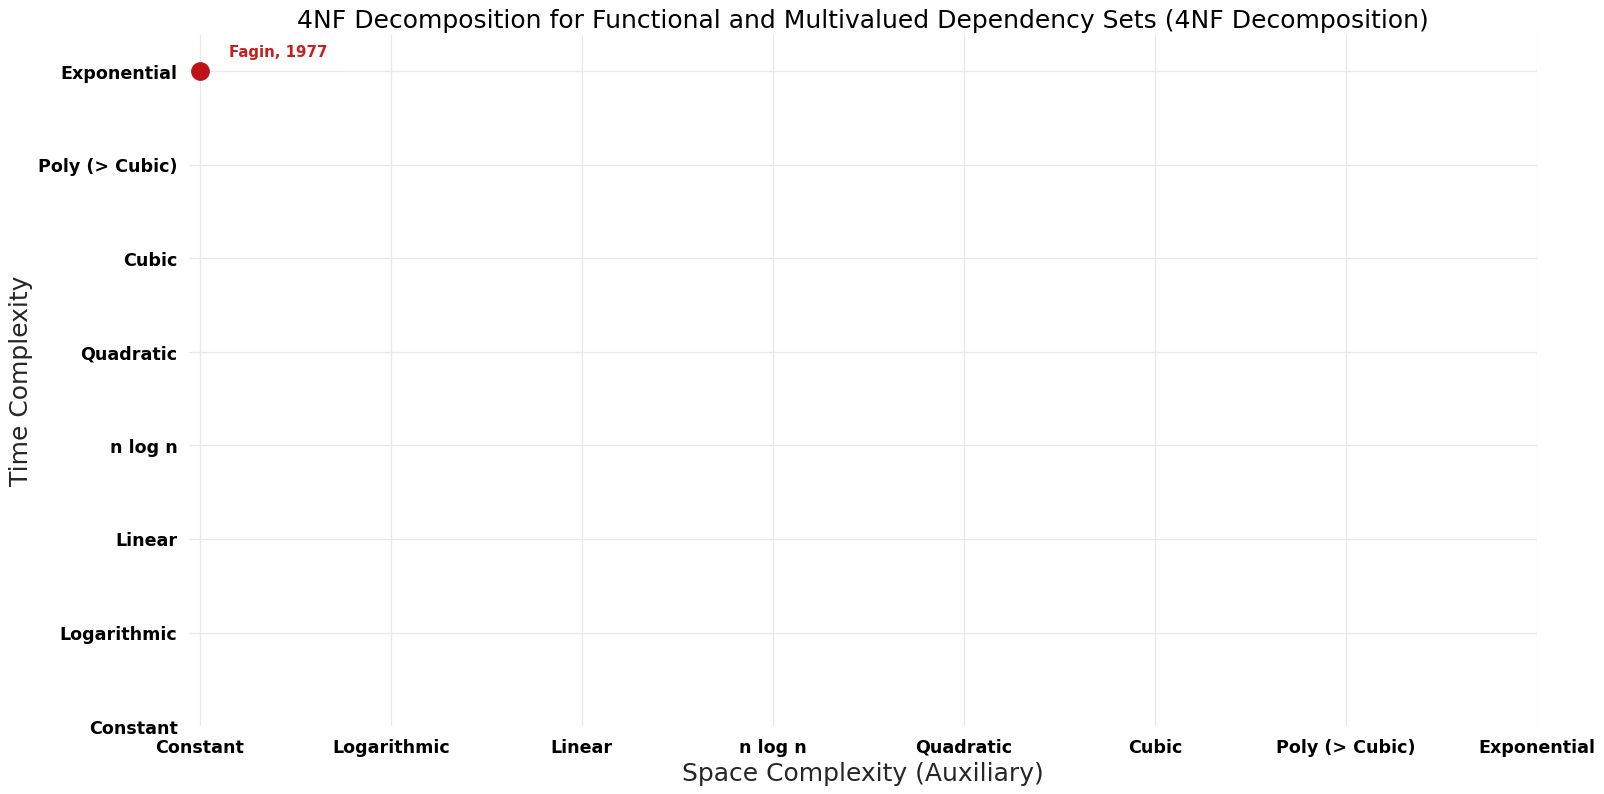 File:4NF Decomposition - 4NF Decomposition for Functional and Multivalued Dependency Sets - Pareto Frontier.png